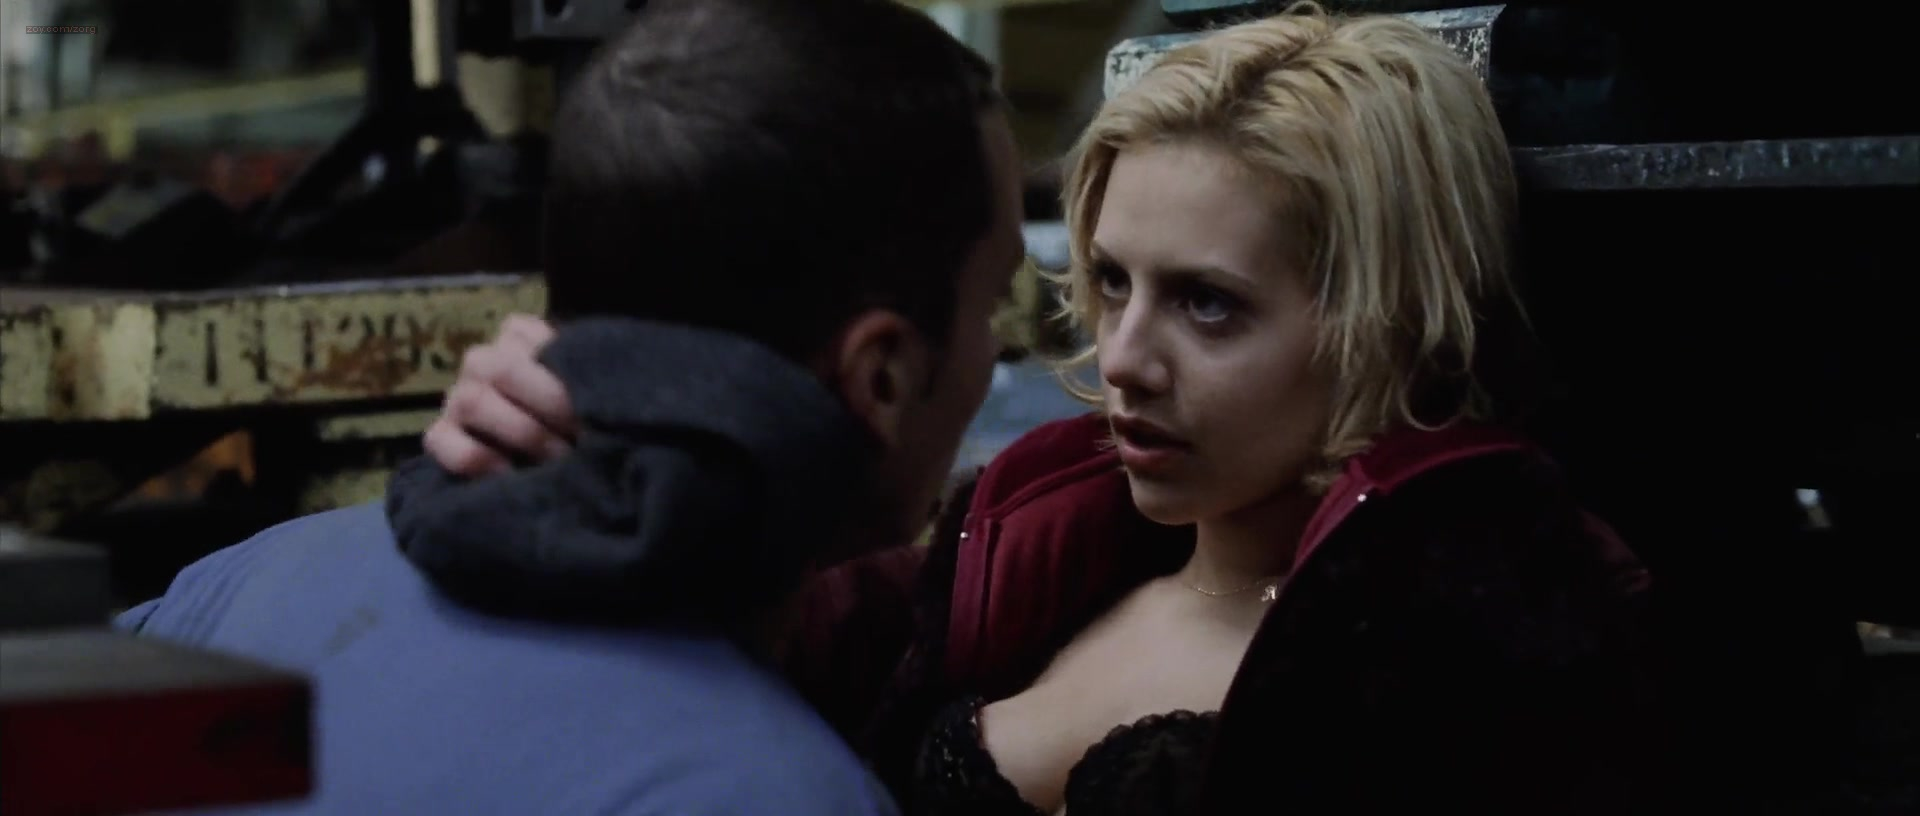 Brittany Murphy sexy - 8 Mile (2002)